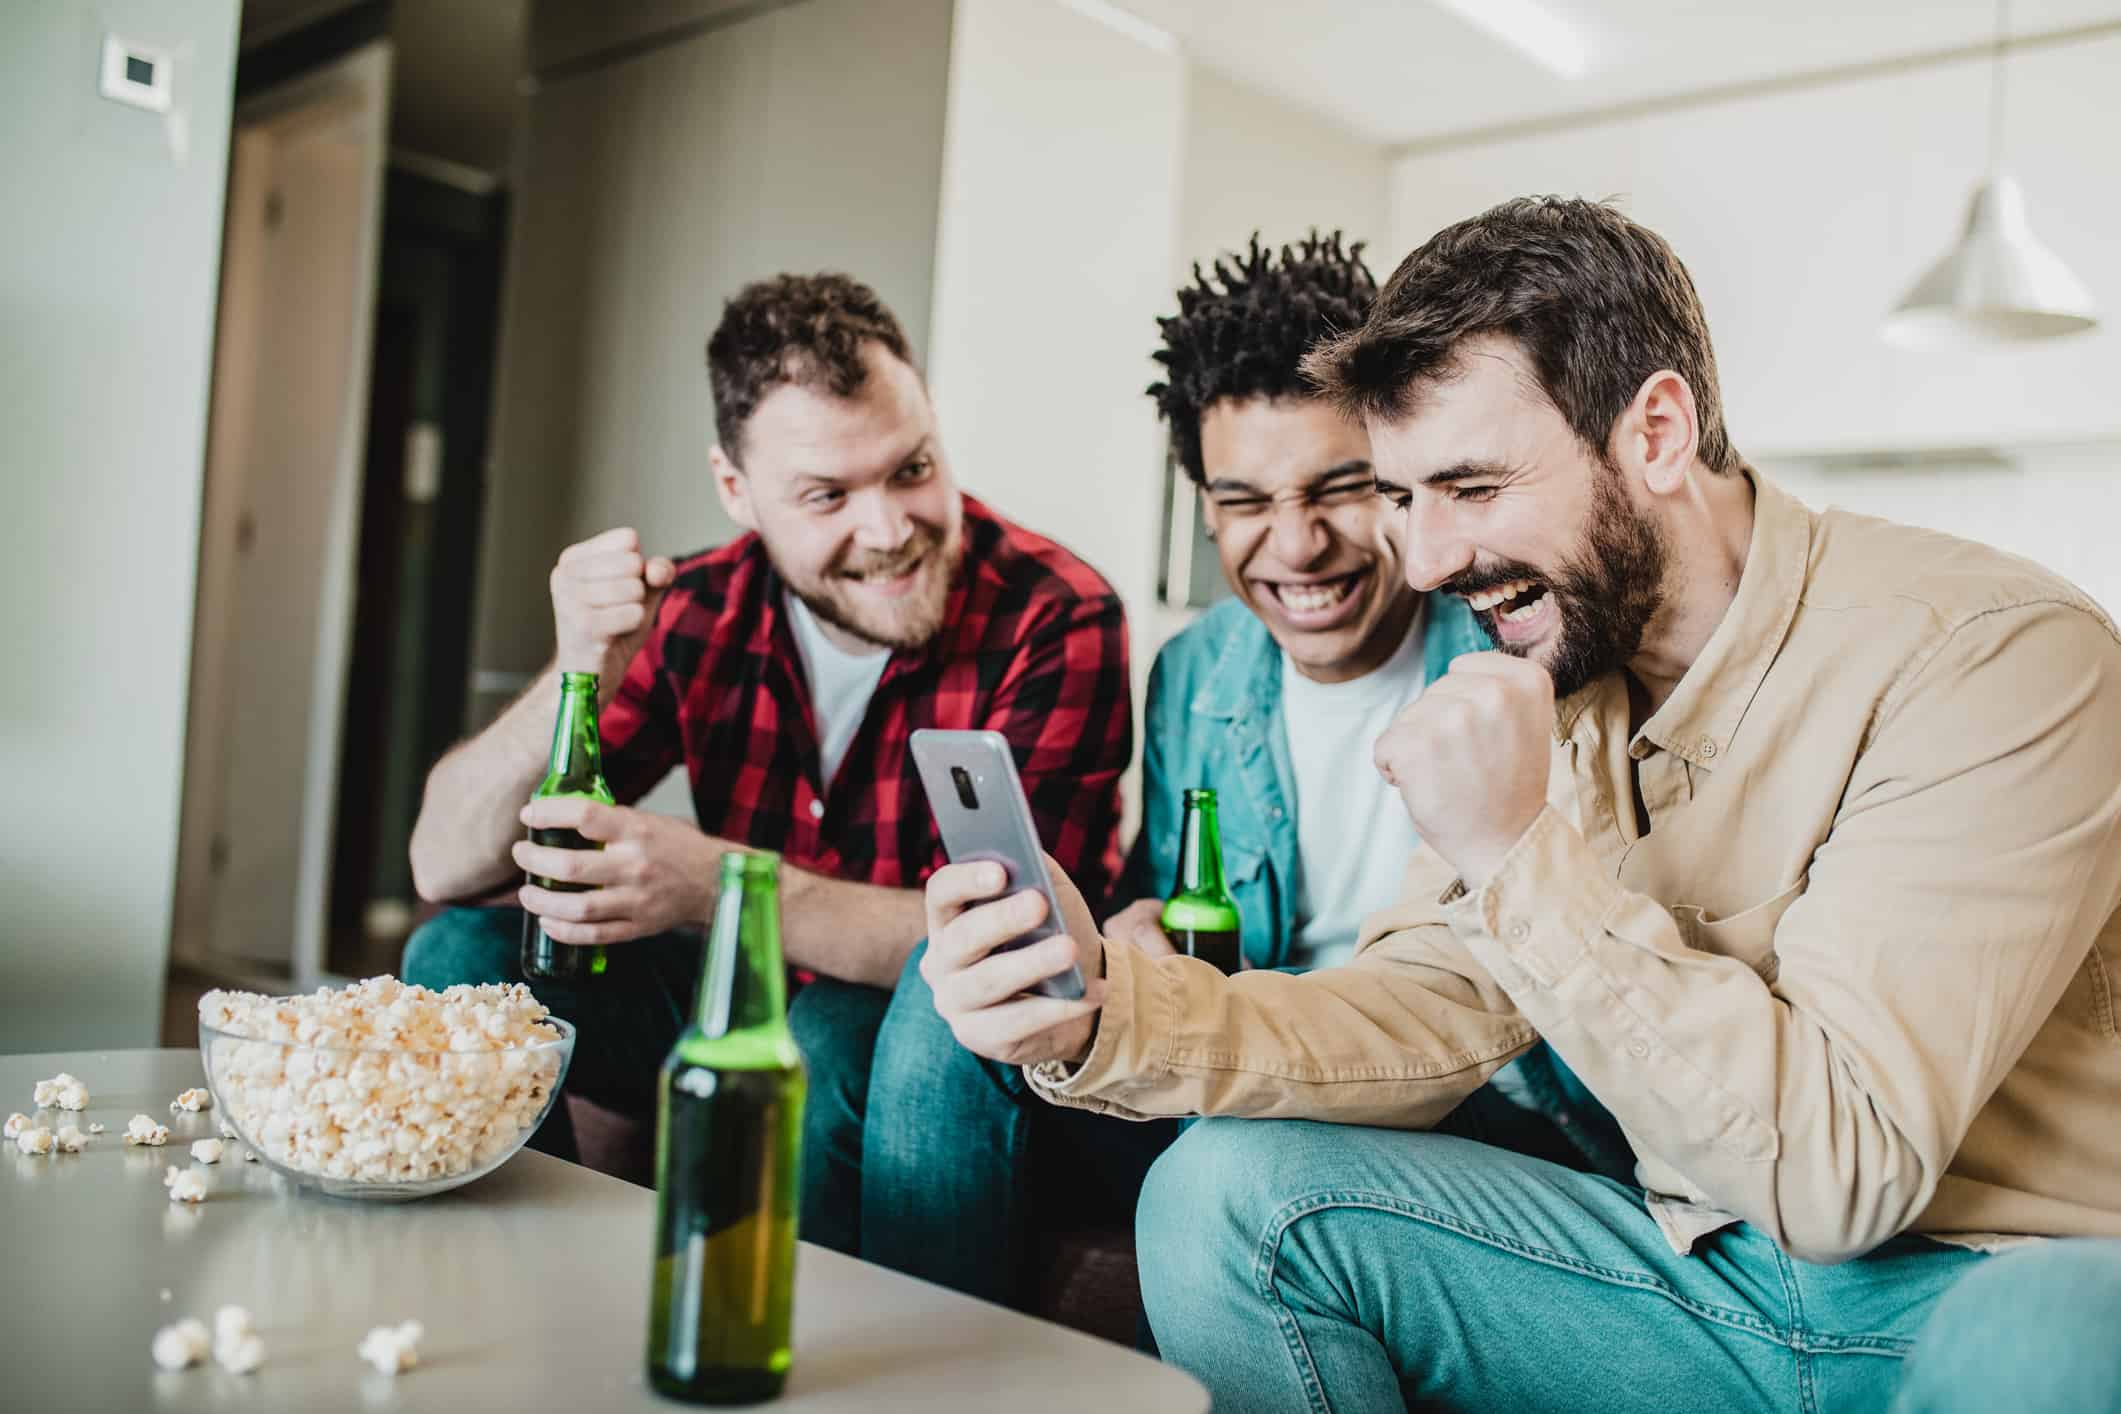 a group of three young men sit on a sofa in a home environment with a bowl of popcorn and beer bottls in front of them cheering on one of their group as he looks excitedly at his phone as though he's just had some success on an online gambling app.